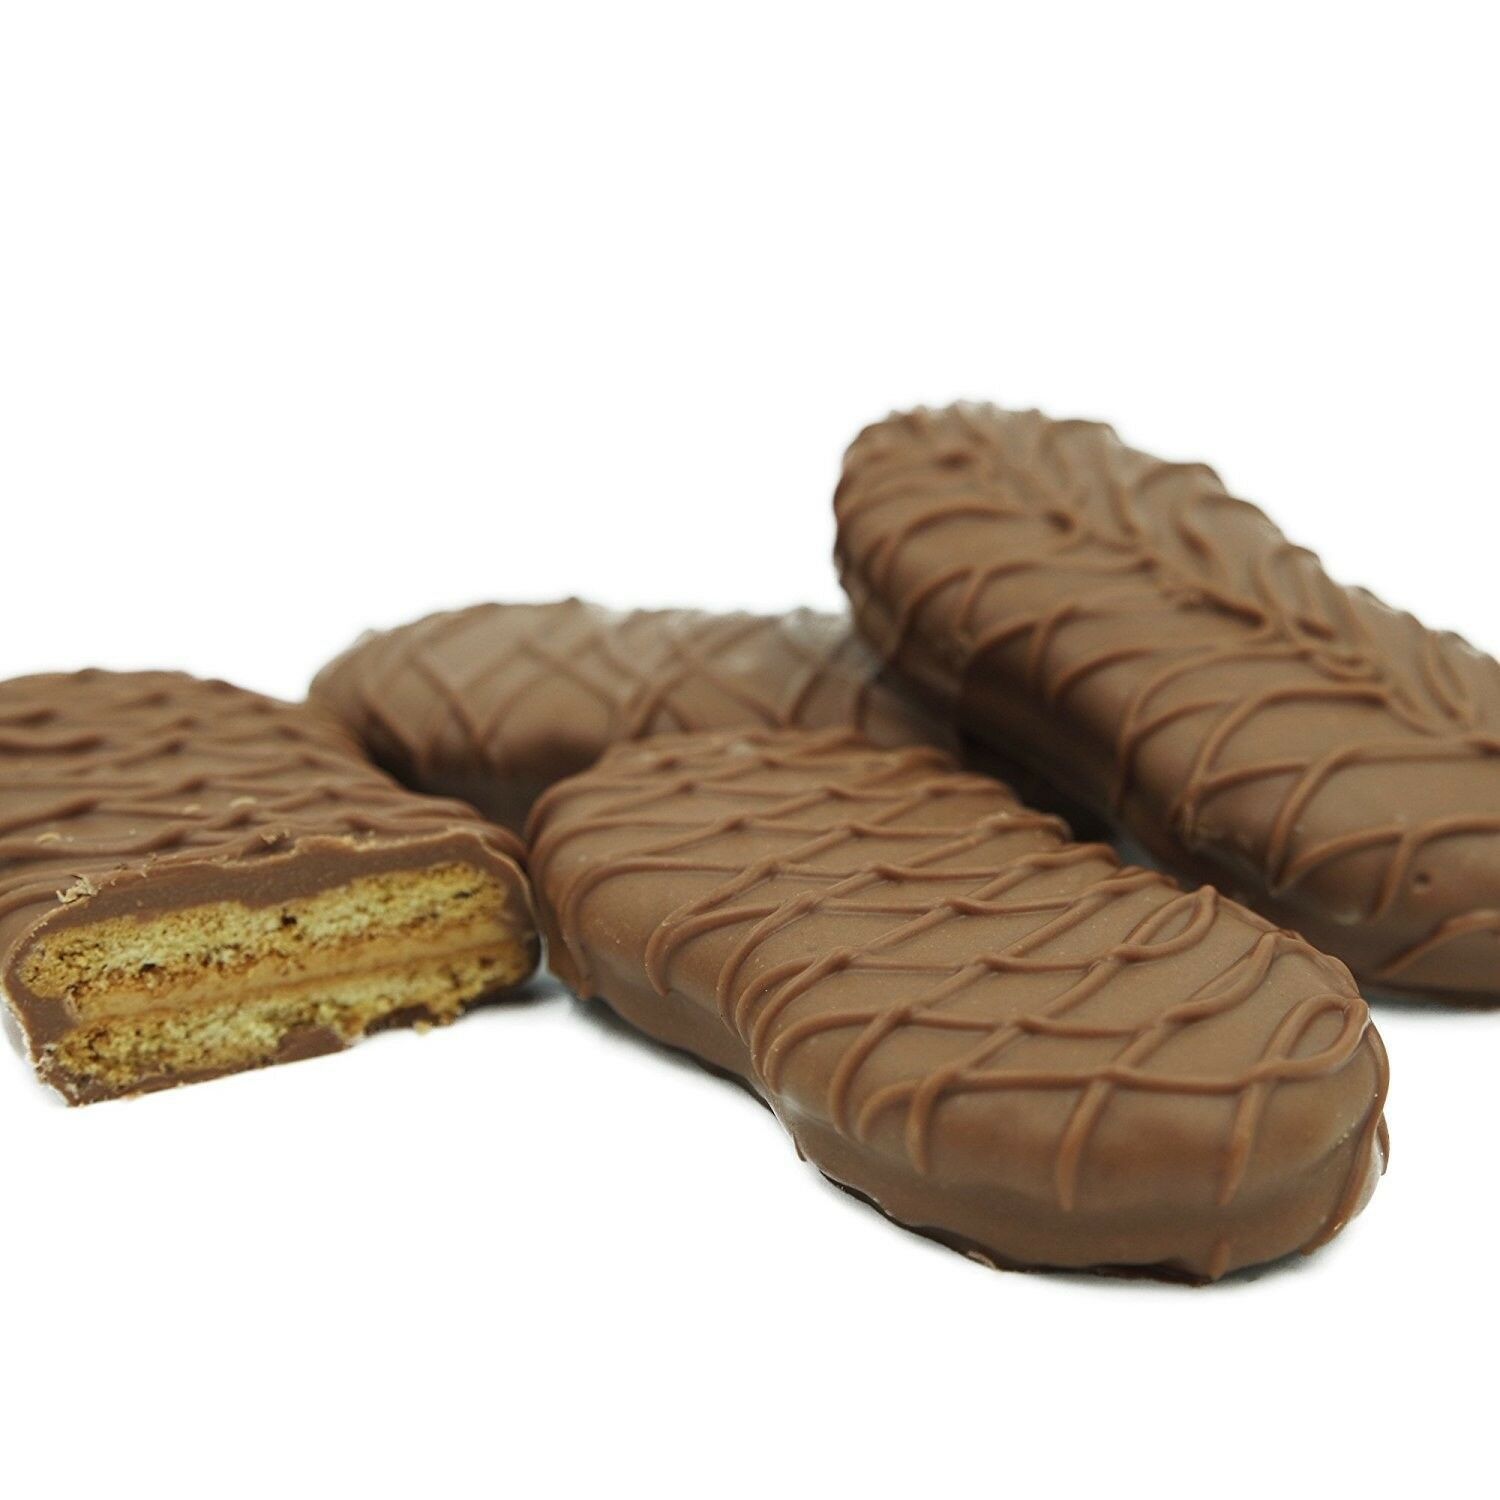 Philadelphia Candies Milk Chocolate Covered Nutter Butter® Cookies, 8 Ounce Gift - $13.81